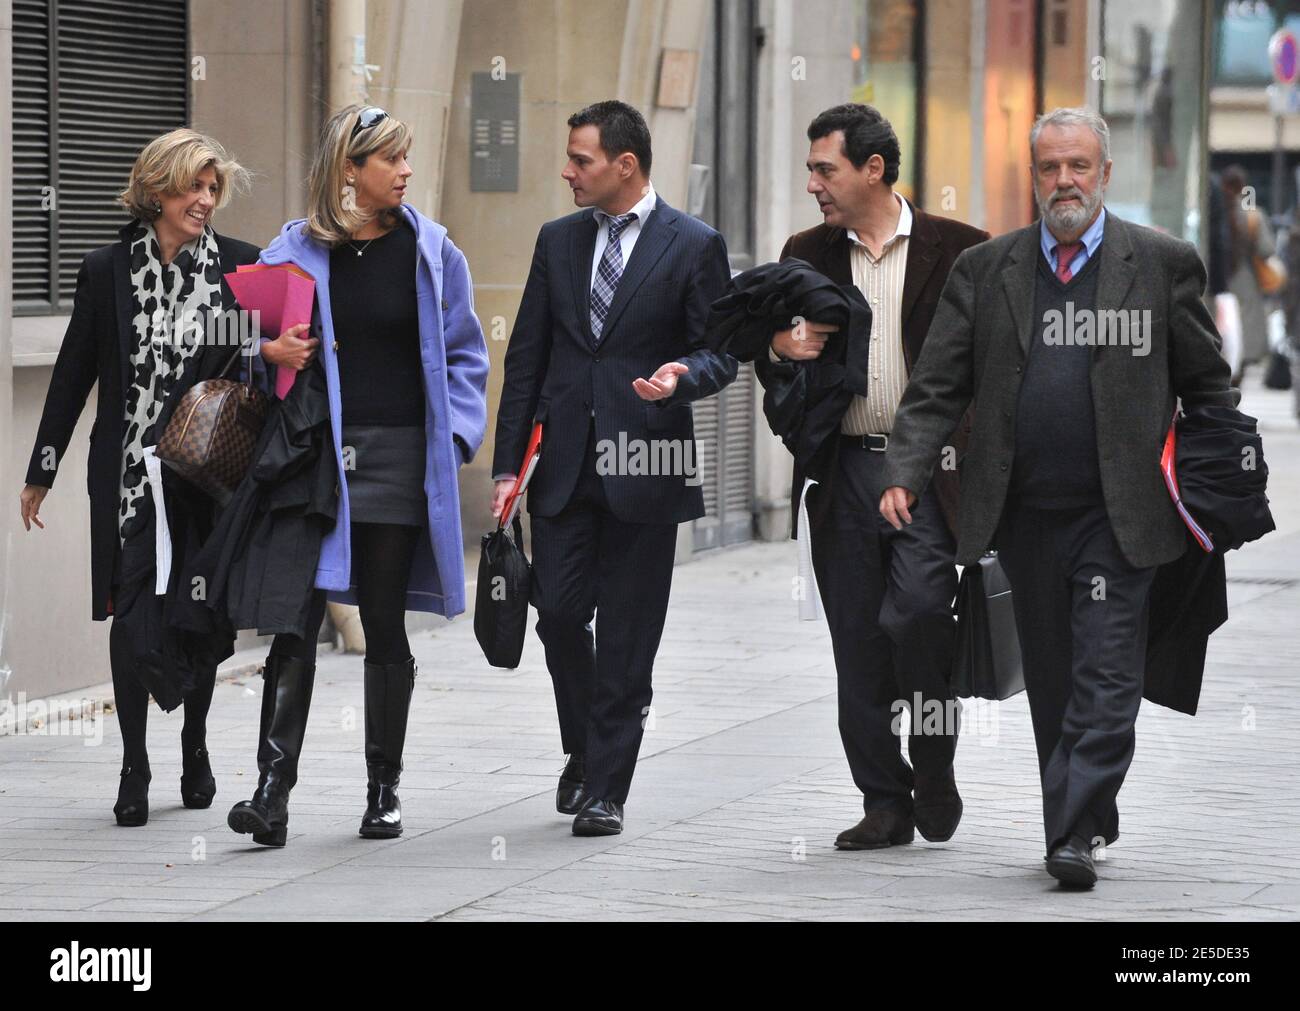 Former French trader Jerome Kerviel (C) of the French bank Societe Generale  (SG) arrives with his lawyers Caroline Wassermann (2nd L), Bernard Benaiem  (2nd R) and Francis Tissot (R) for a hearing